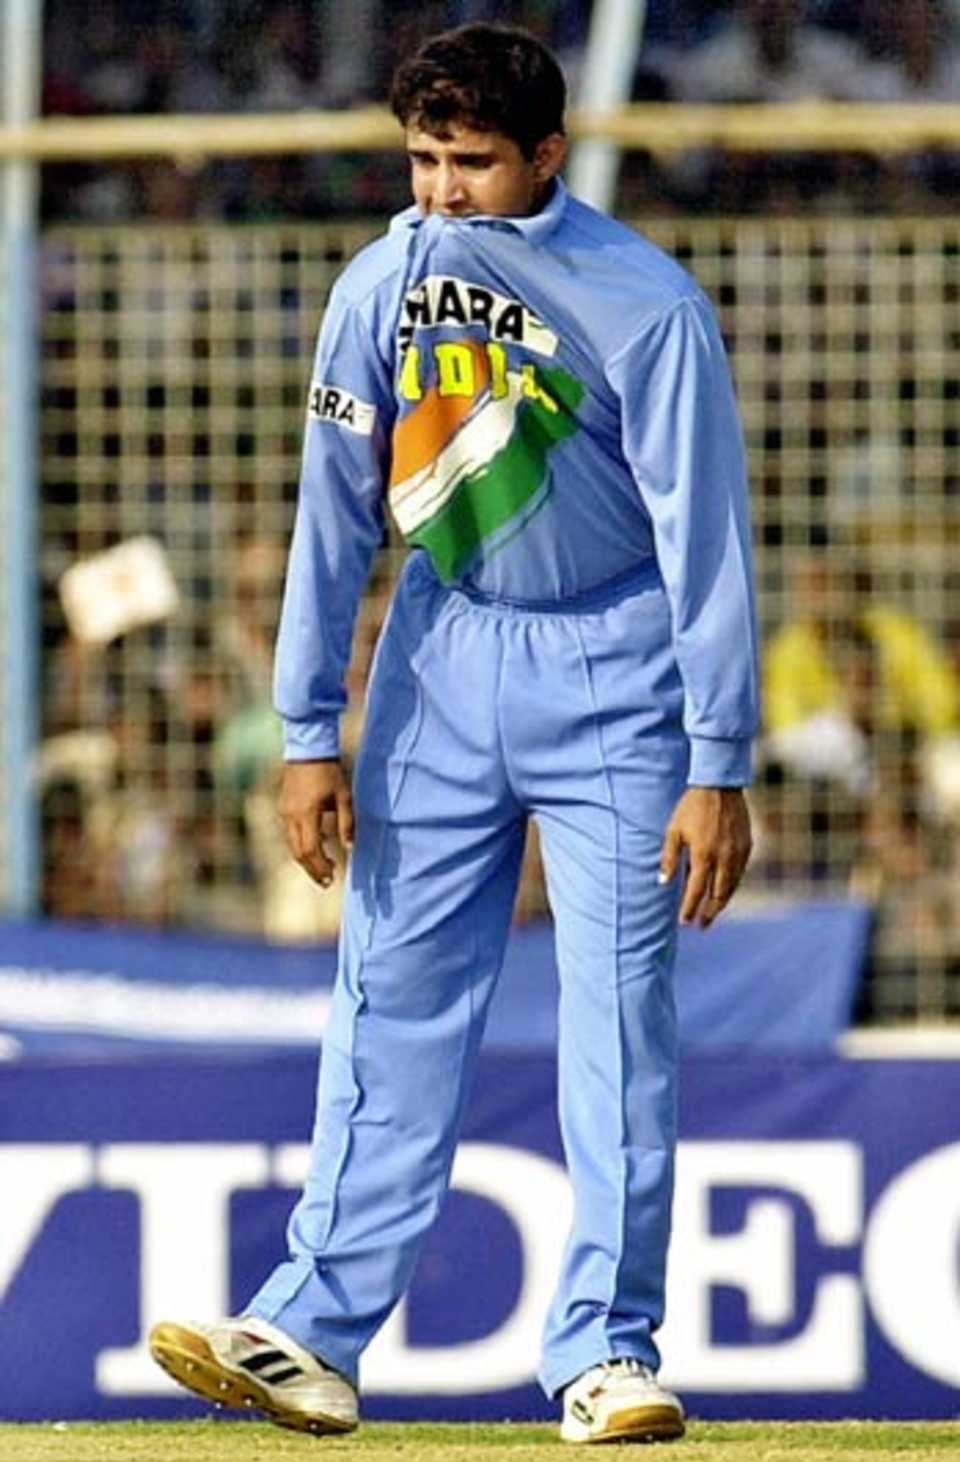 Sourav Ganguly has a bite of his shirt